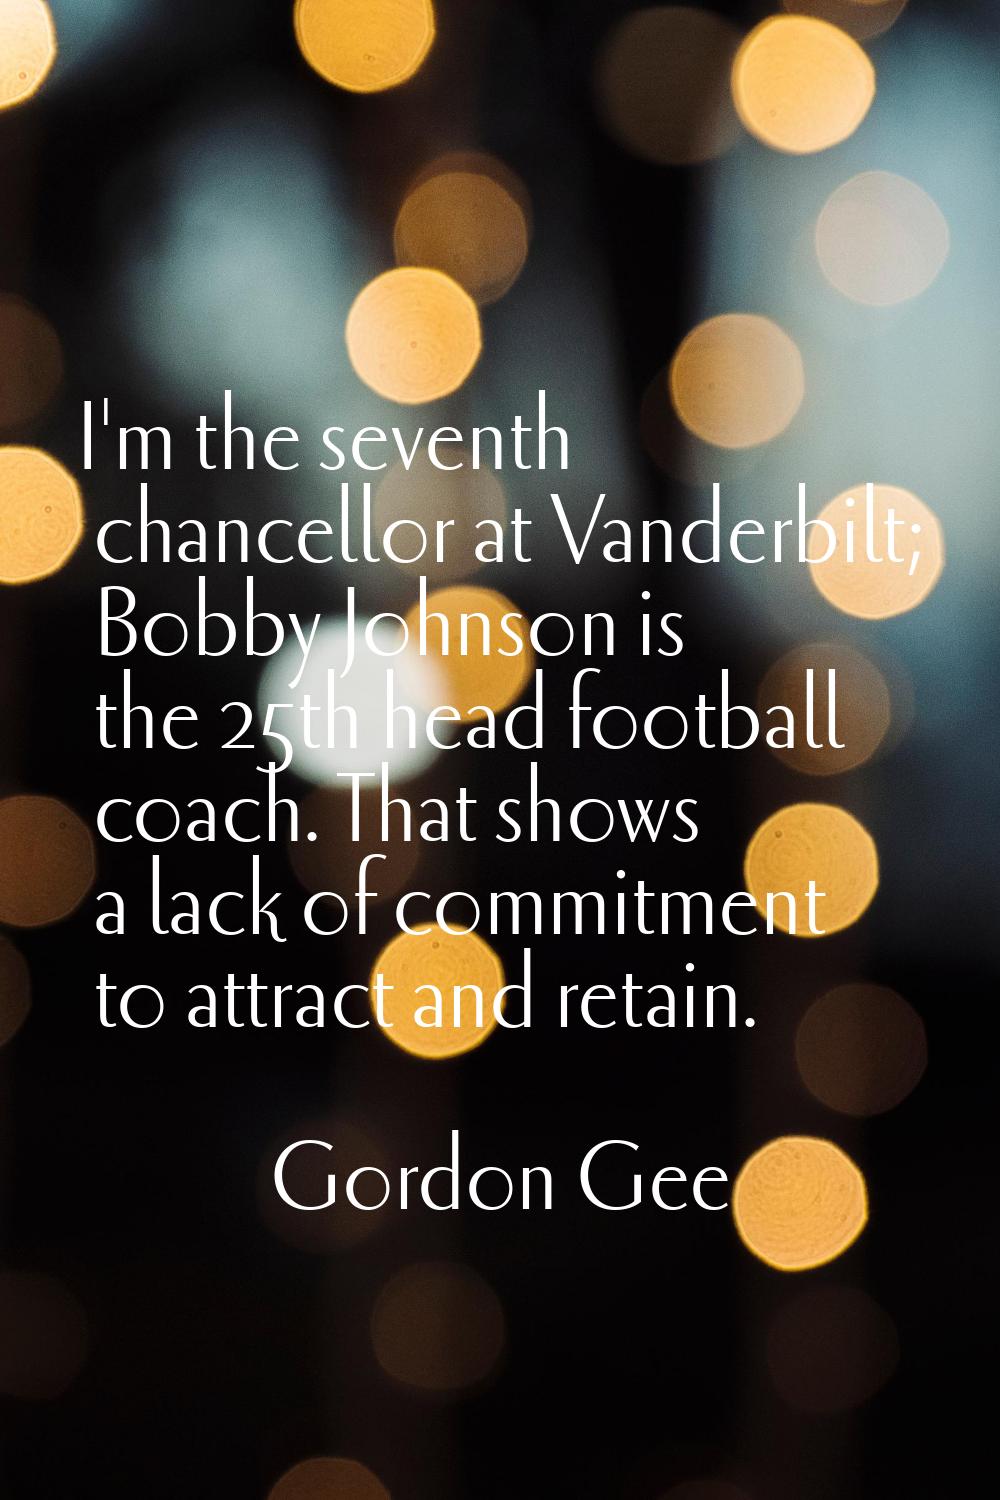 I'm the seventh chancellor at Vanderbilt; Bobby Johnson is the 25th head football coach. That shows